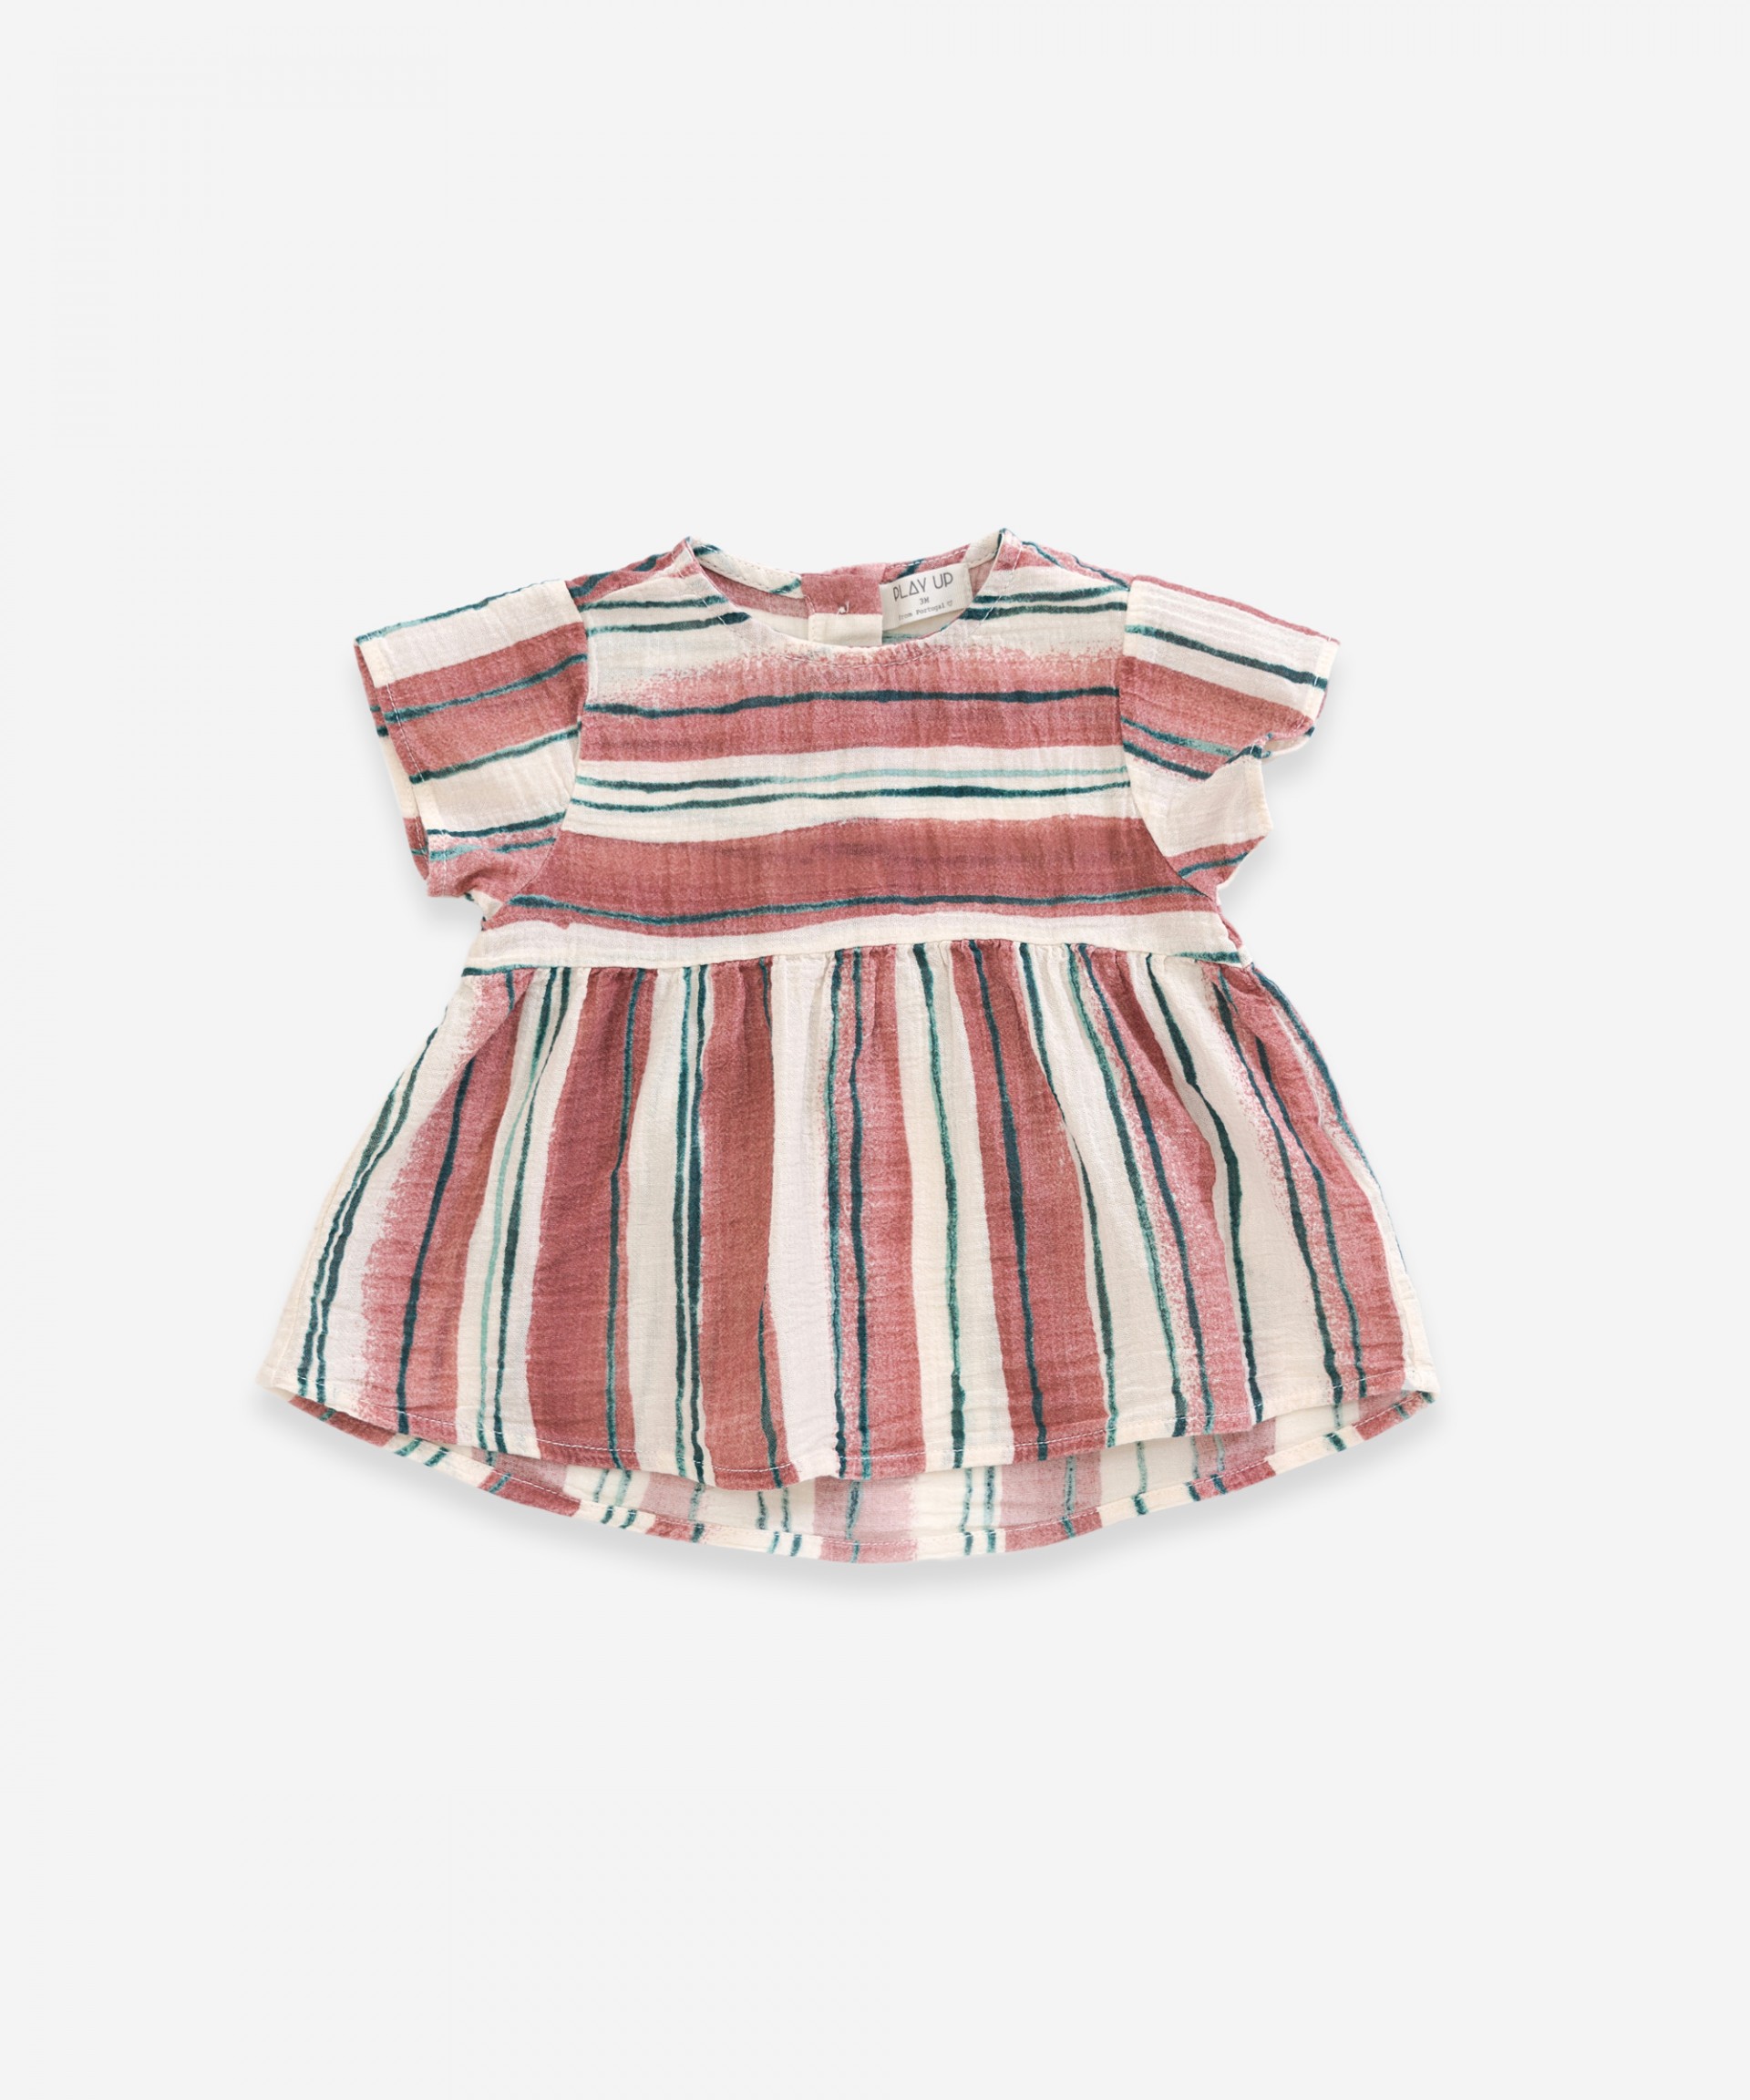 Cotton tunic with striped print | Weaving